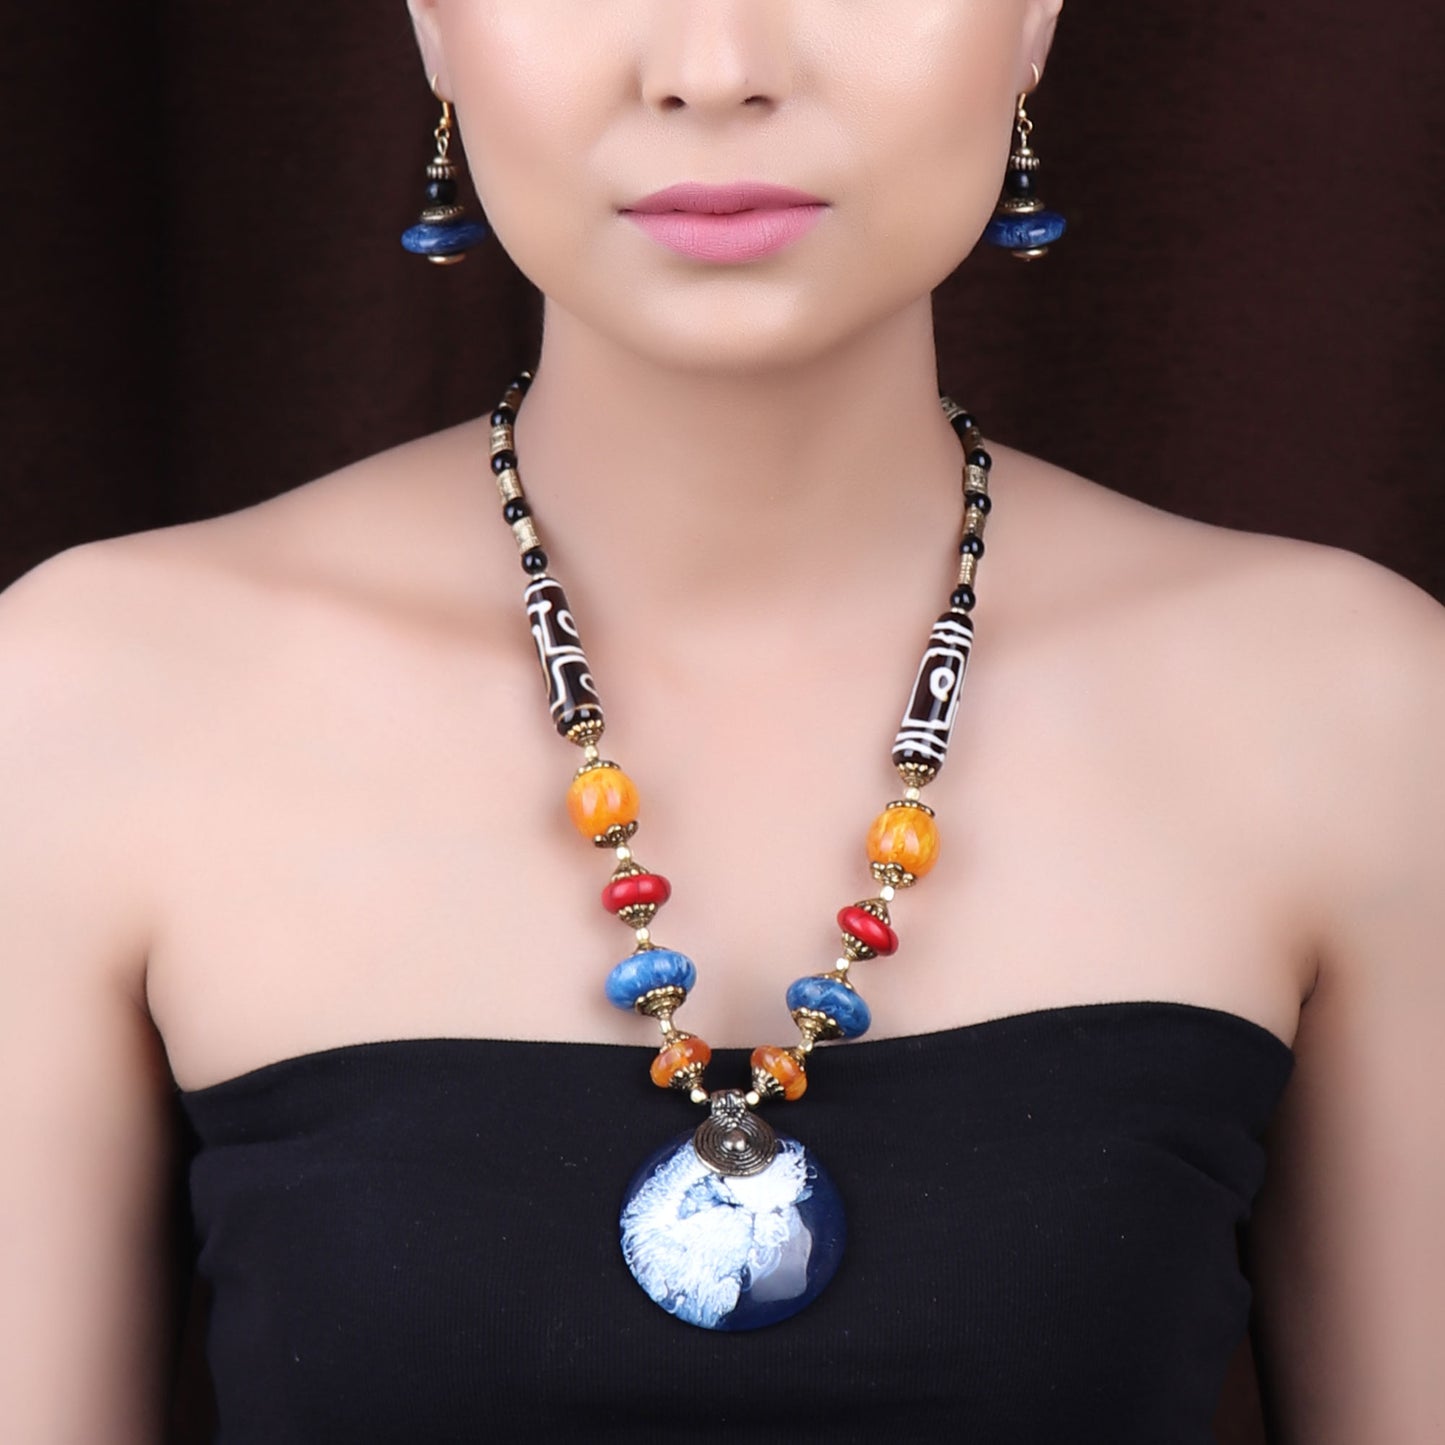 Necklace Set,The Celestial Necklace Set in Blue - Cippele Multi Store